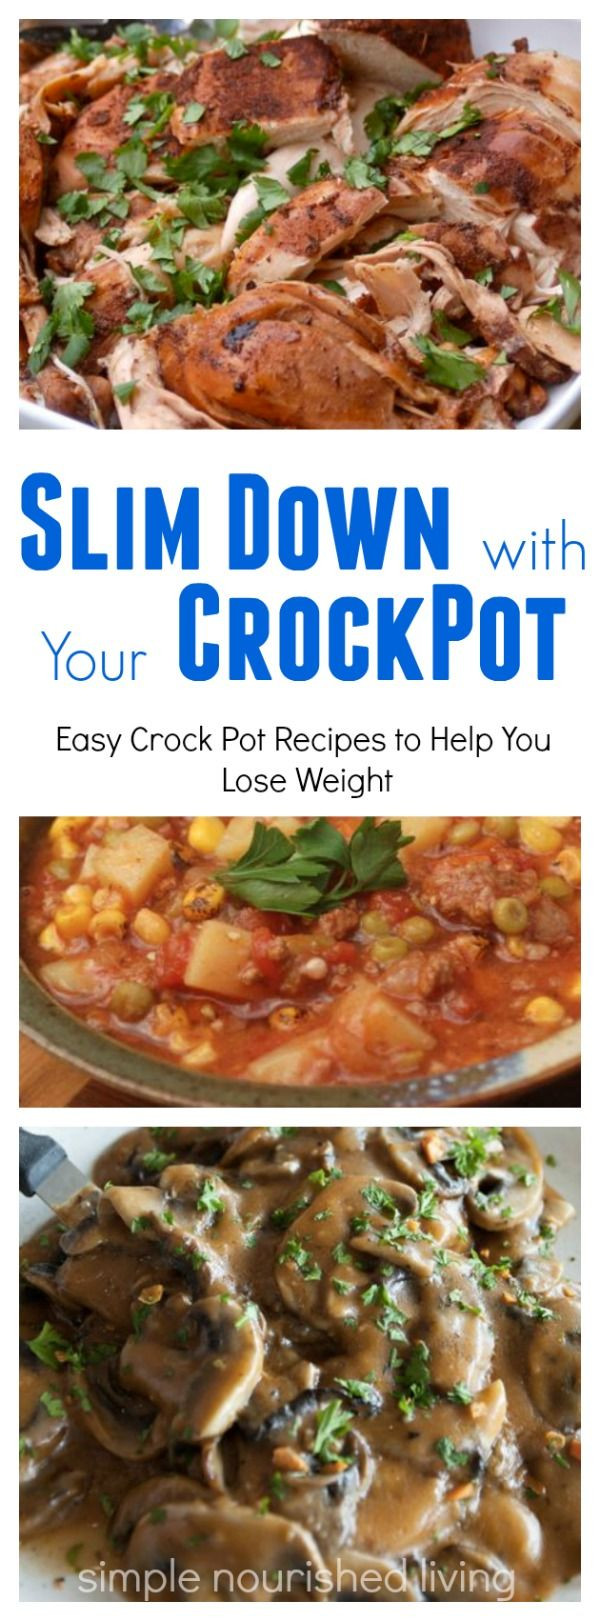 Low Calorie Crockpot Recipes
 Easy Healthy Low Calorie Slow Cooker Recipes with